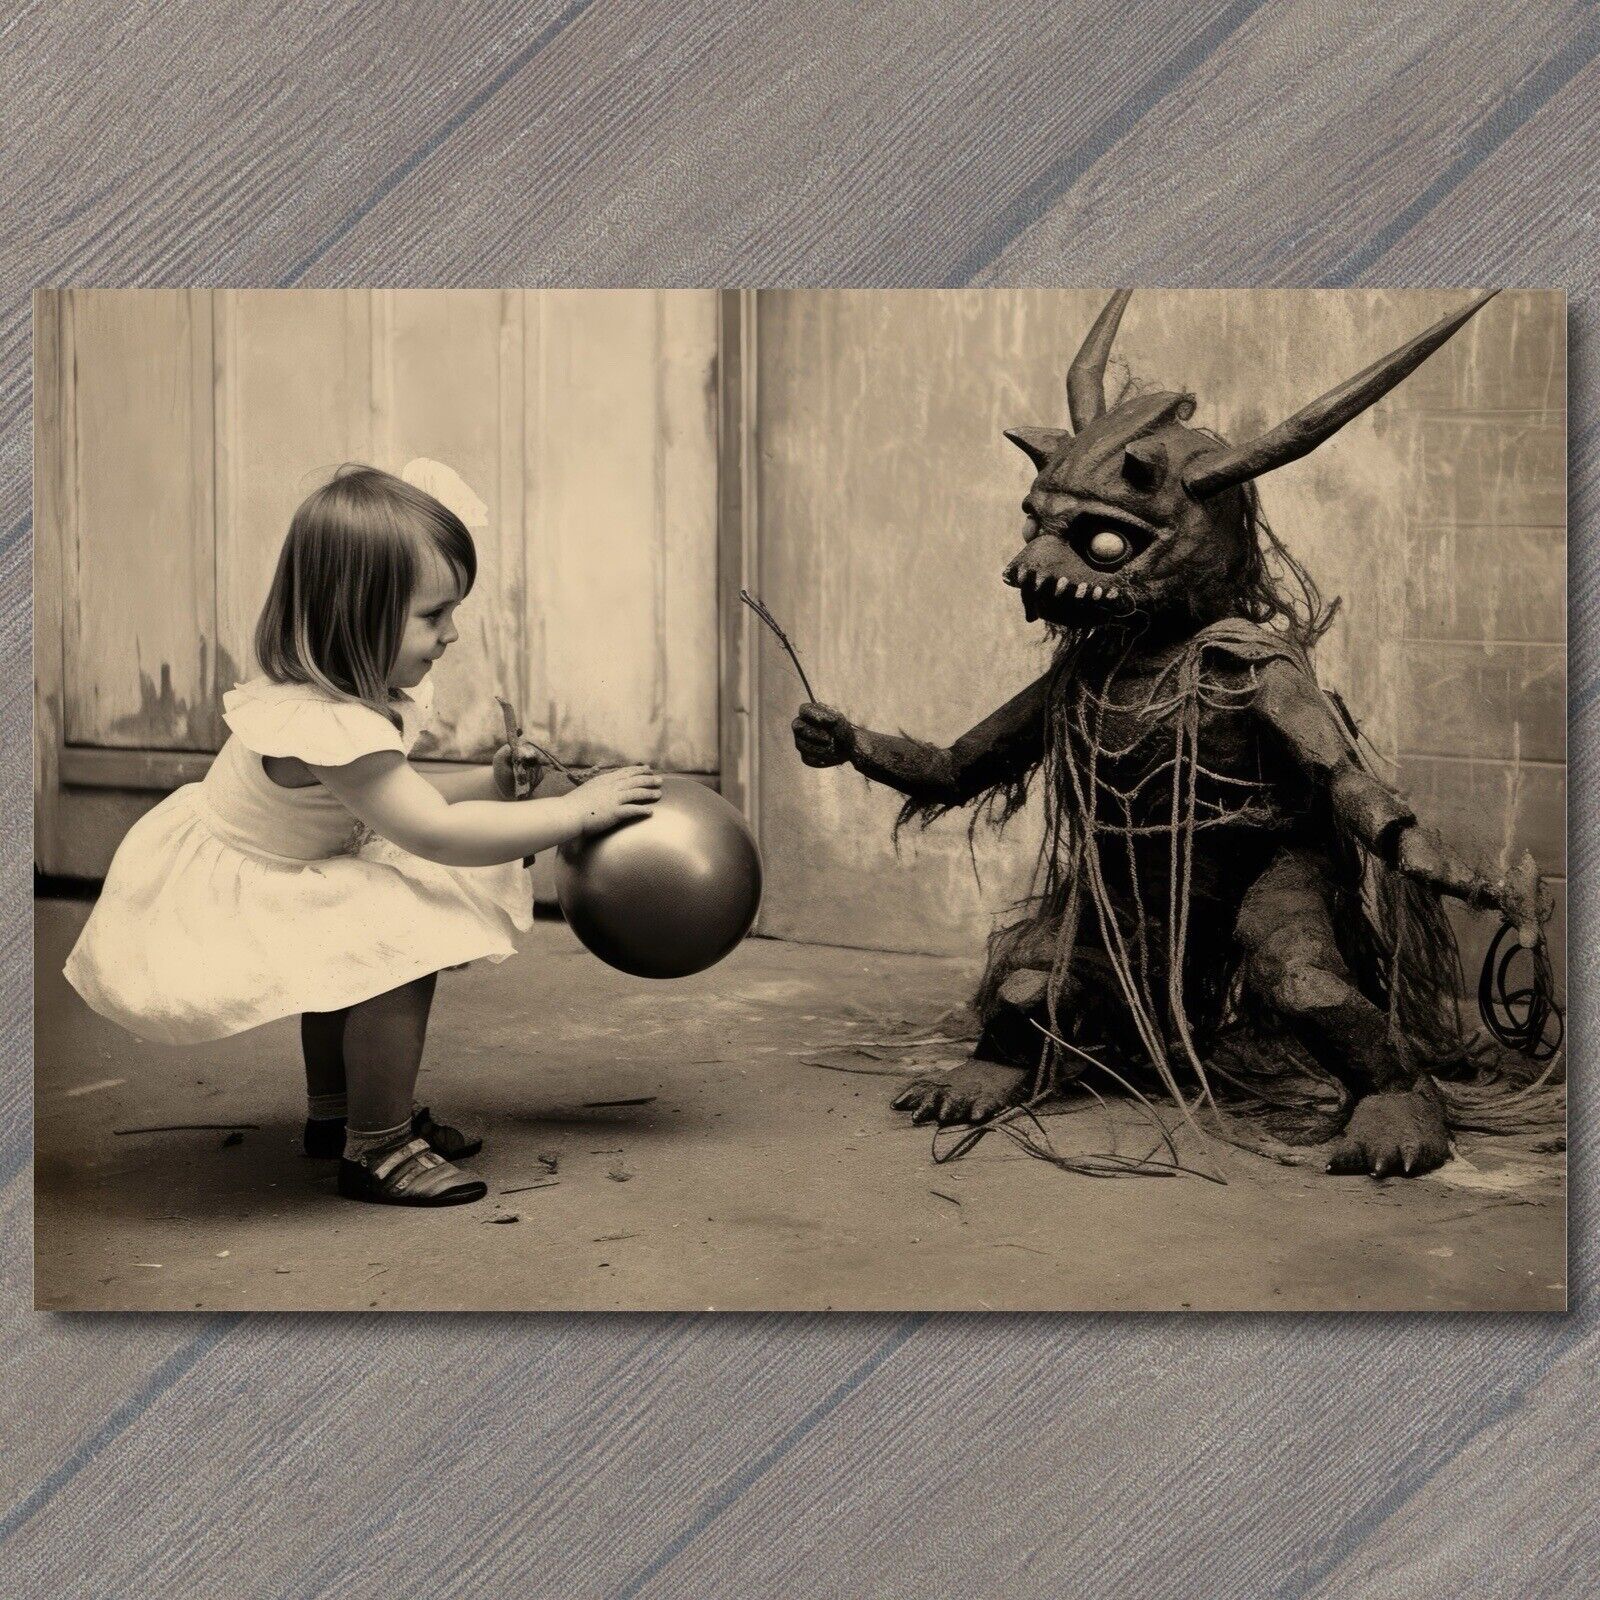 🎃👻POSTCARD: Weird Child Scary Vintage Halloween Monster Cult Unusual Unreal